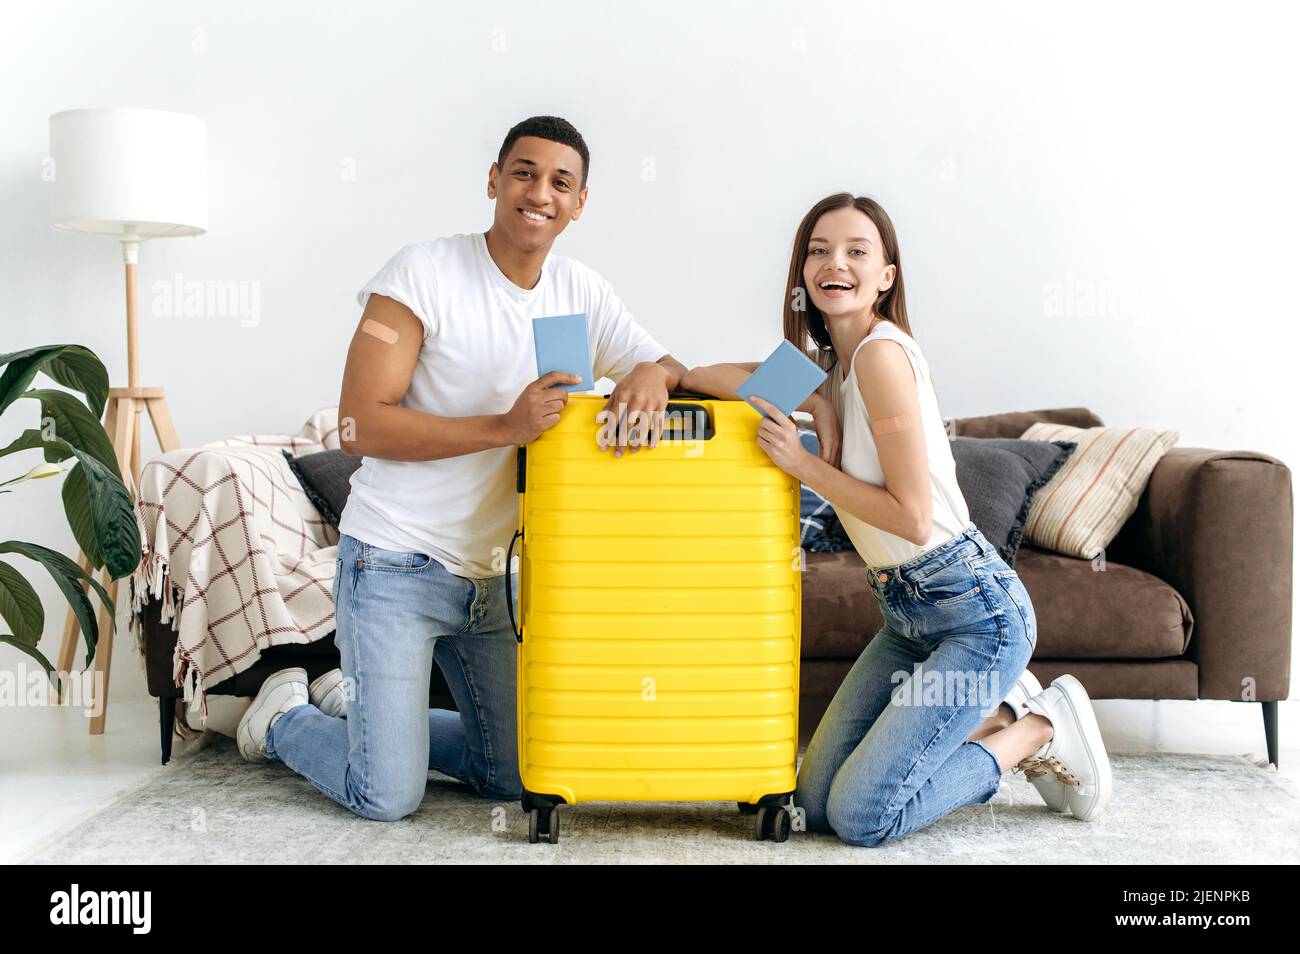 Long-awaited vacation, travel. Happy multiracial couple, got the vaccine and going on a trip, sit on the floor in the living room near the yellow suitcase, hold their passports, look at camera, smile Stock Photo